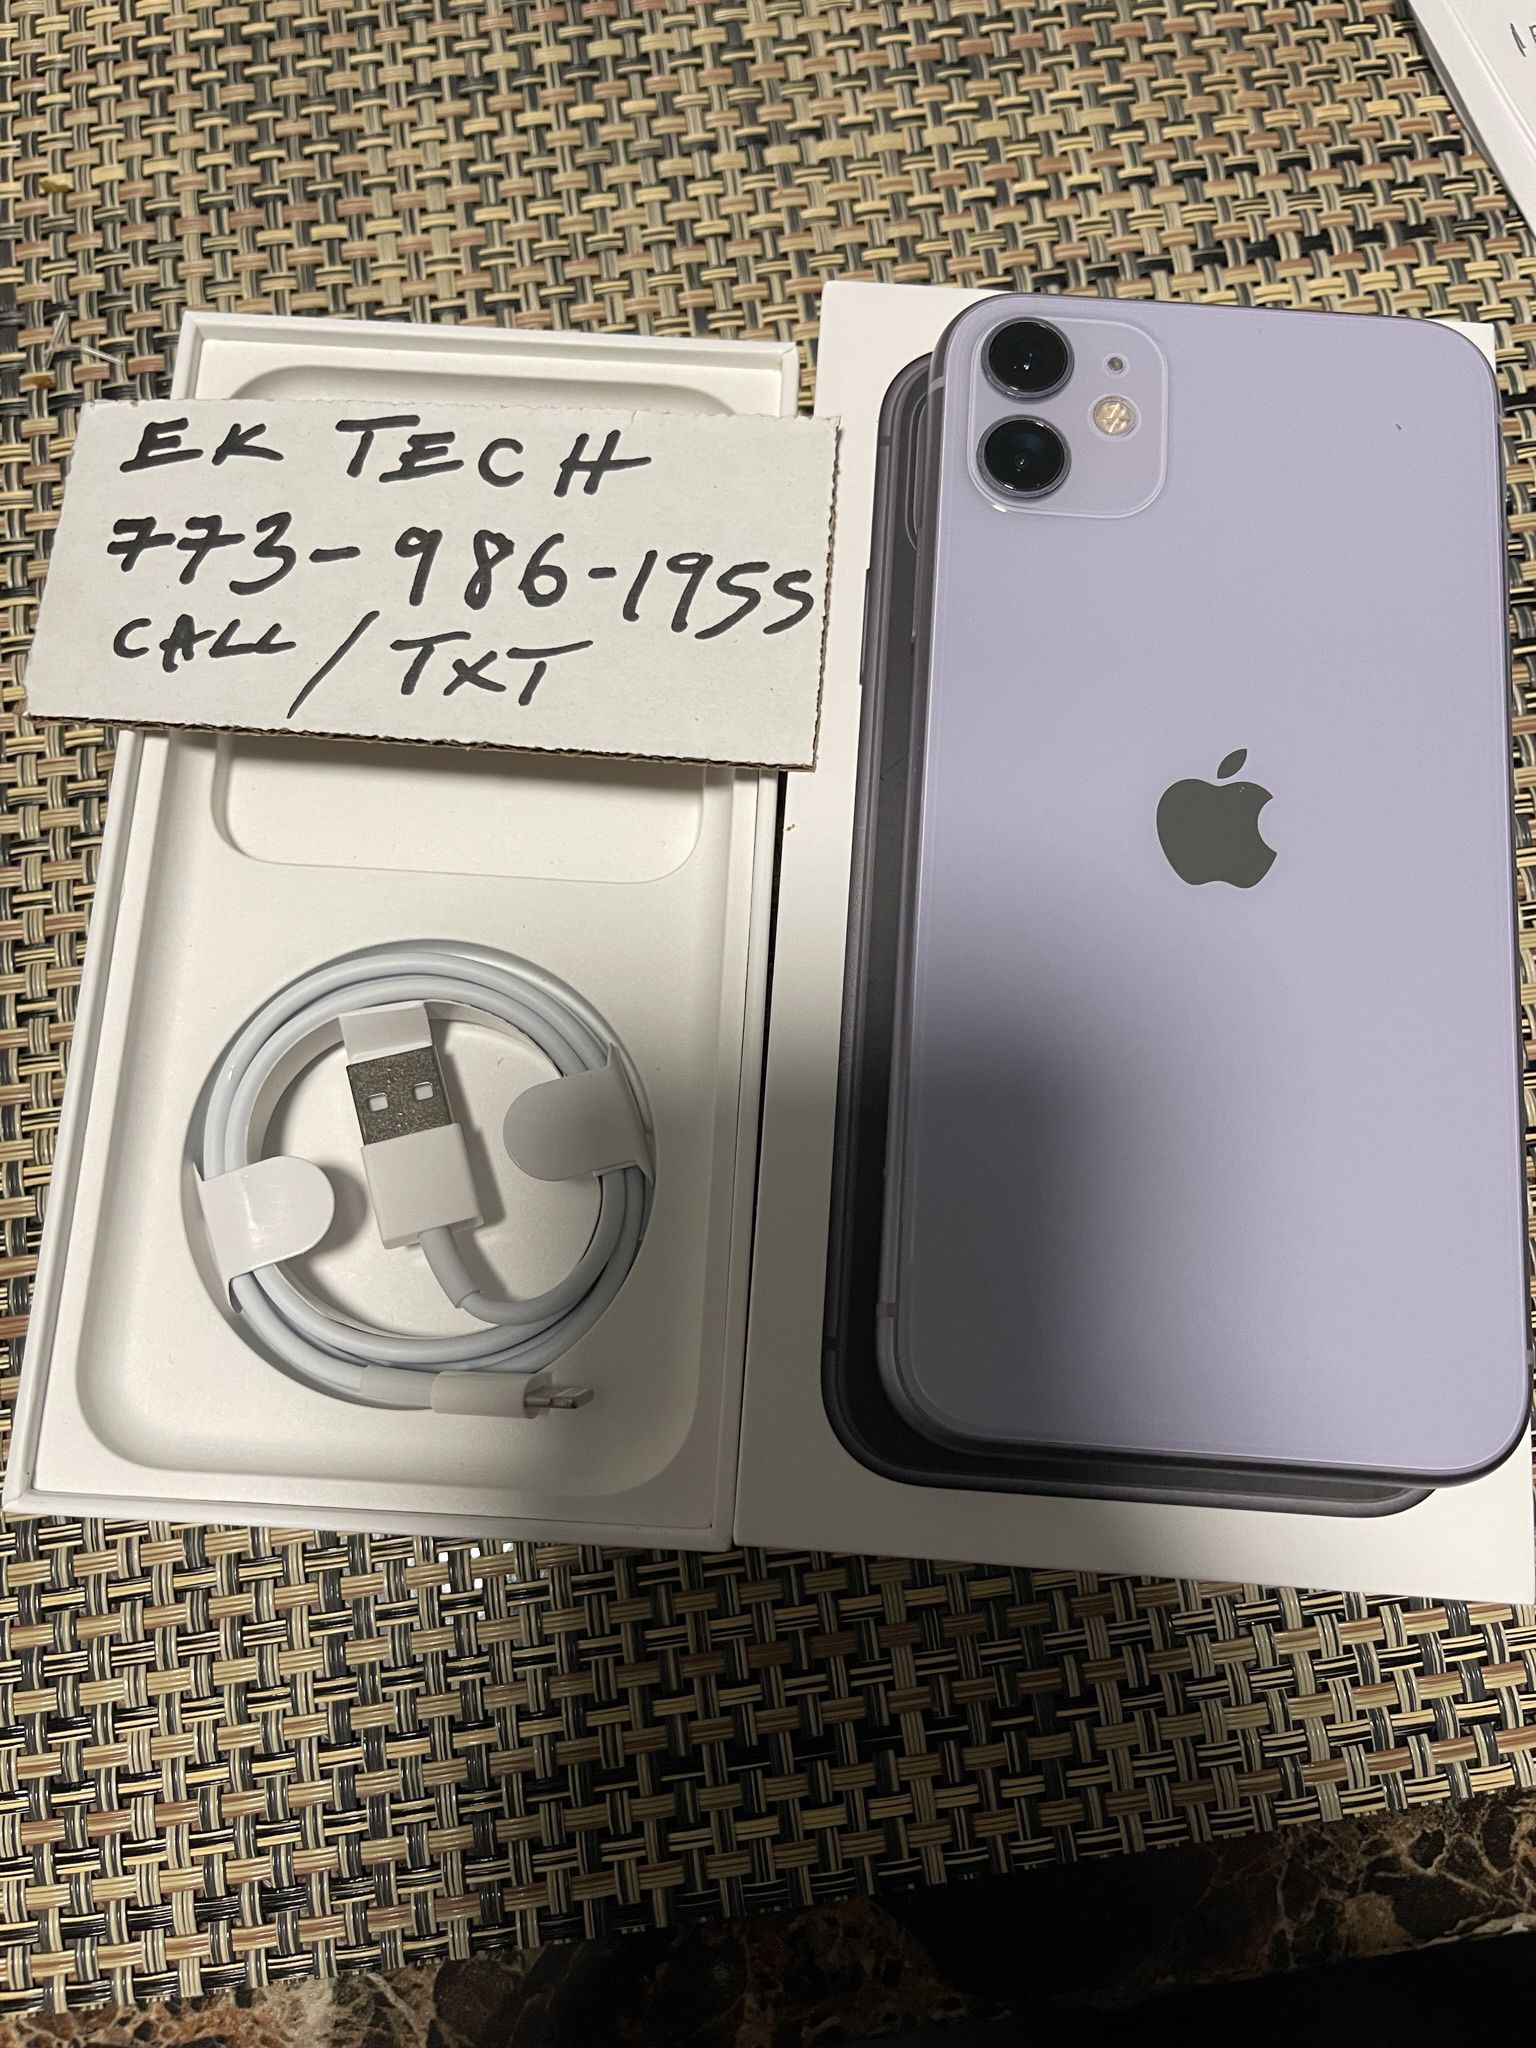 iPhone  g Tmobile Like New for Sale in Chicago, IL   OfferUp